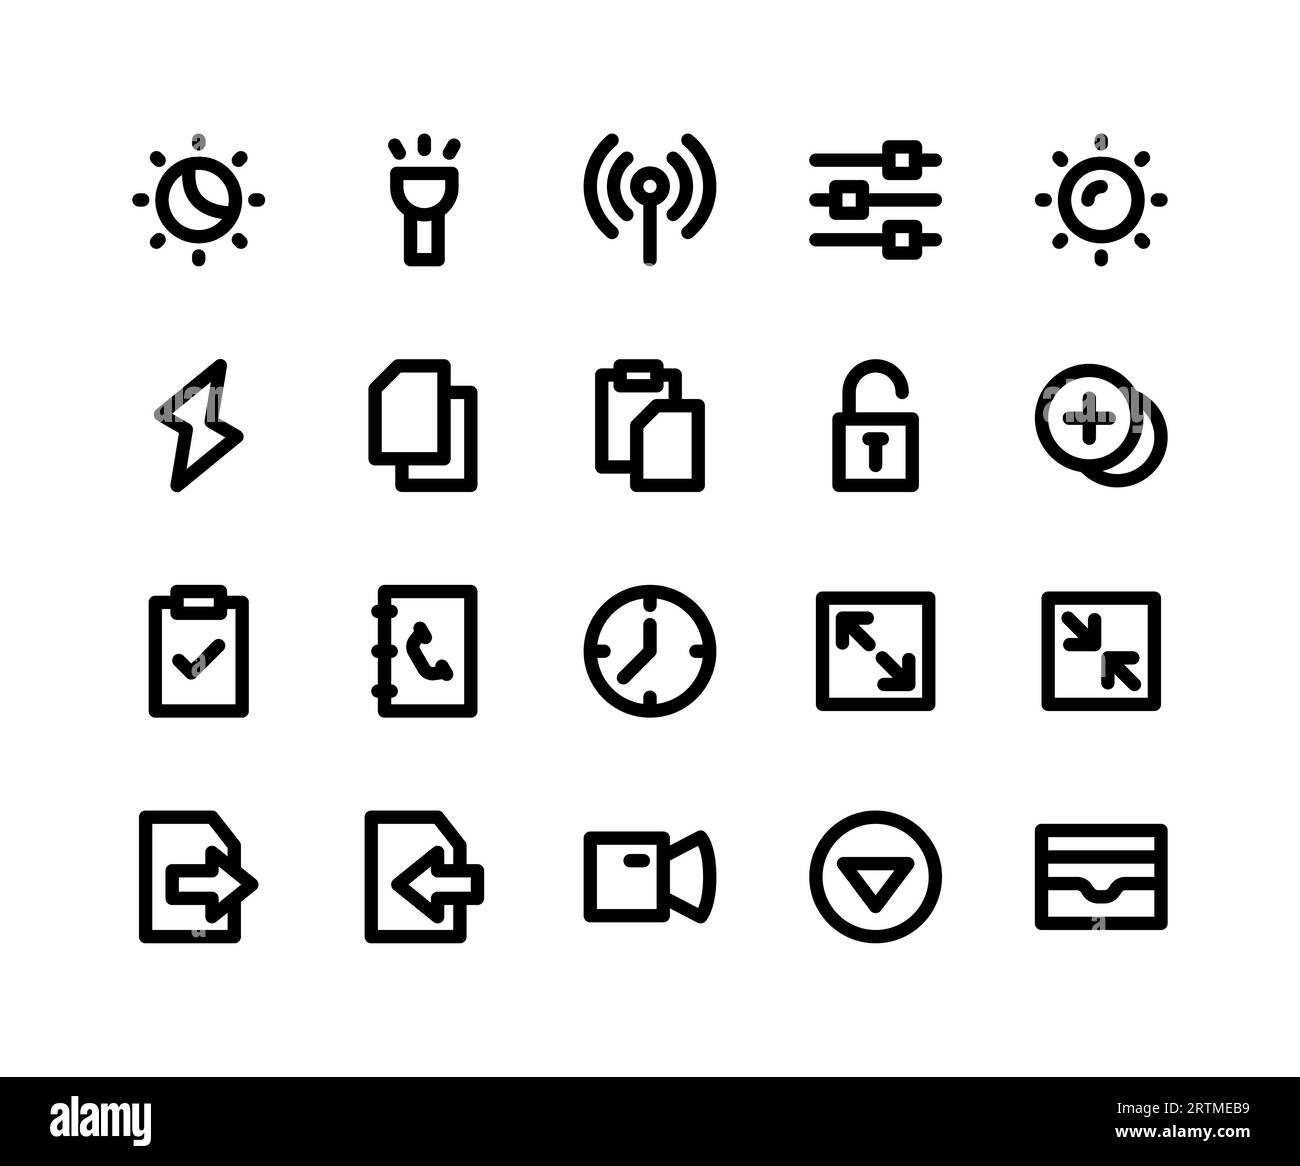 User interface icons for any purpose, Perfect for website and ui design. Stock Vector